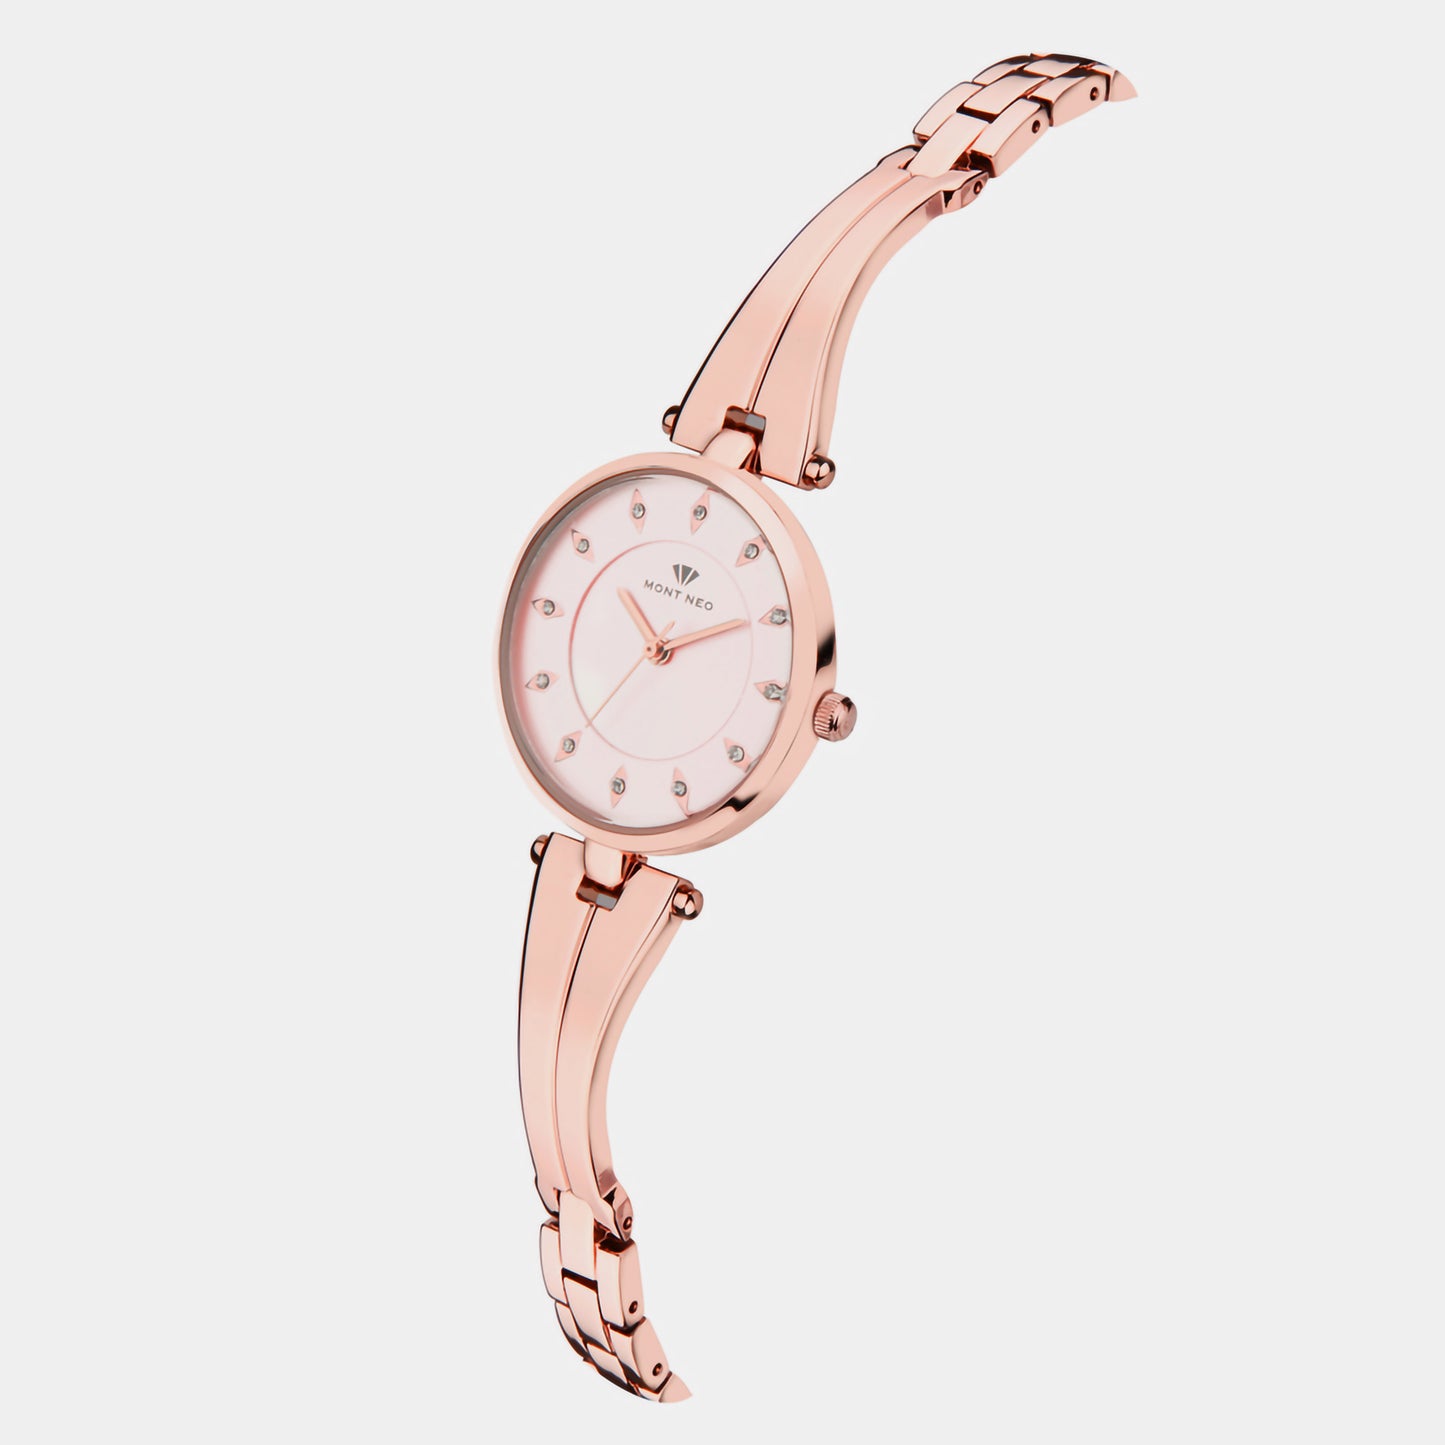 Female Rose Gold Analog Stainless Steel Watch 2003T-M0307